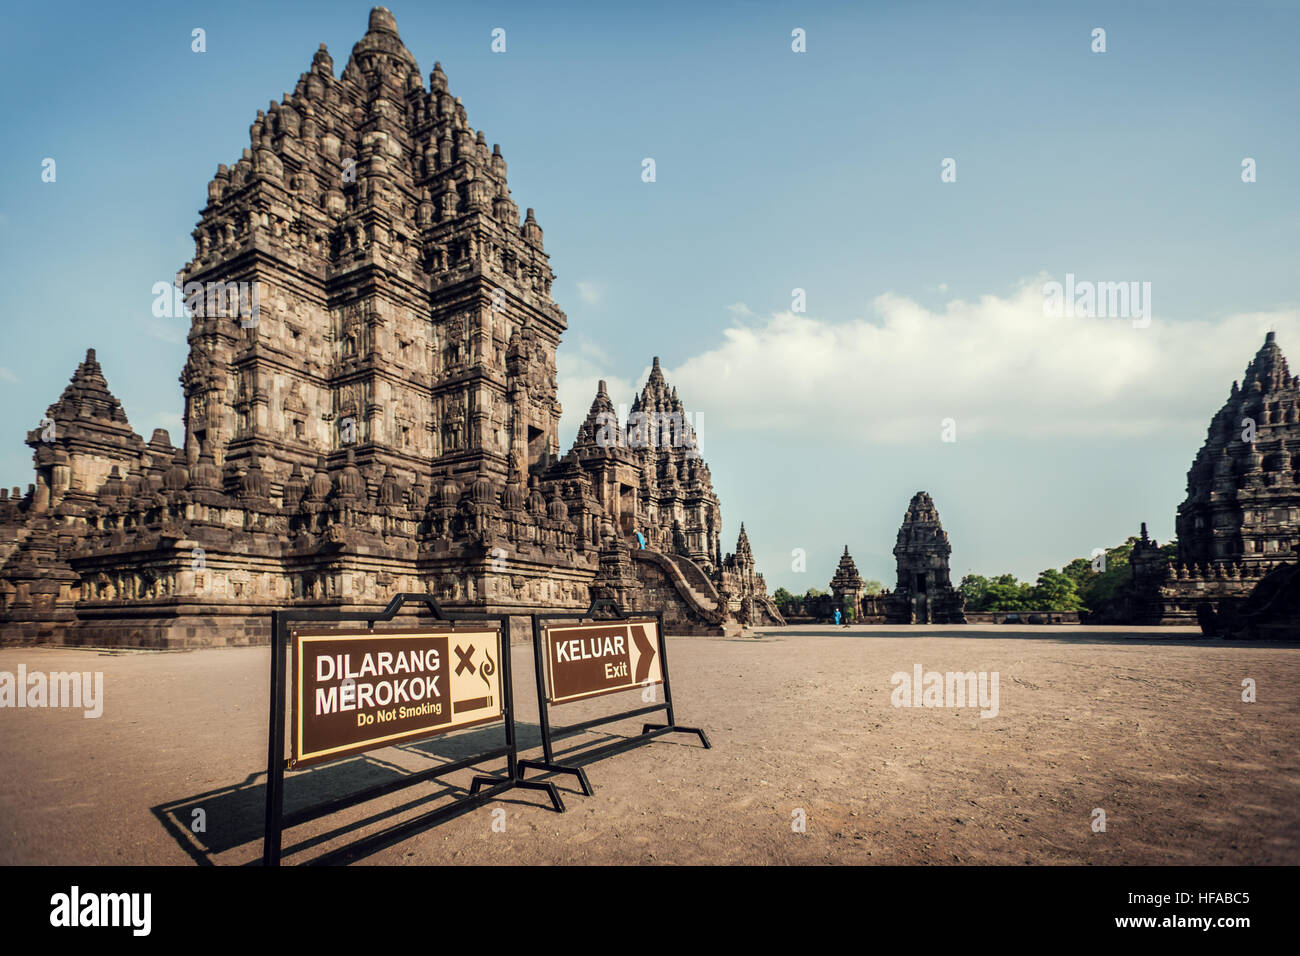 Candi Prambanan Temple is a world famous Hindu monument in Indonesia Stock Photo